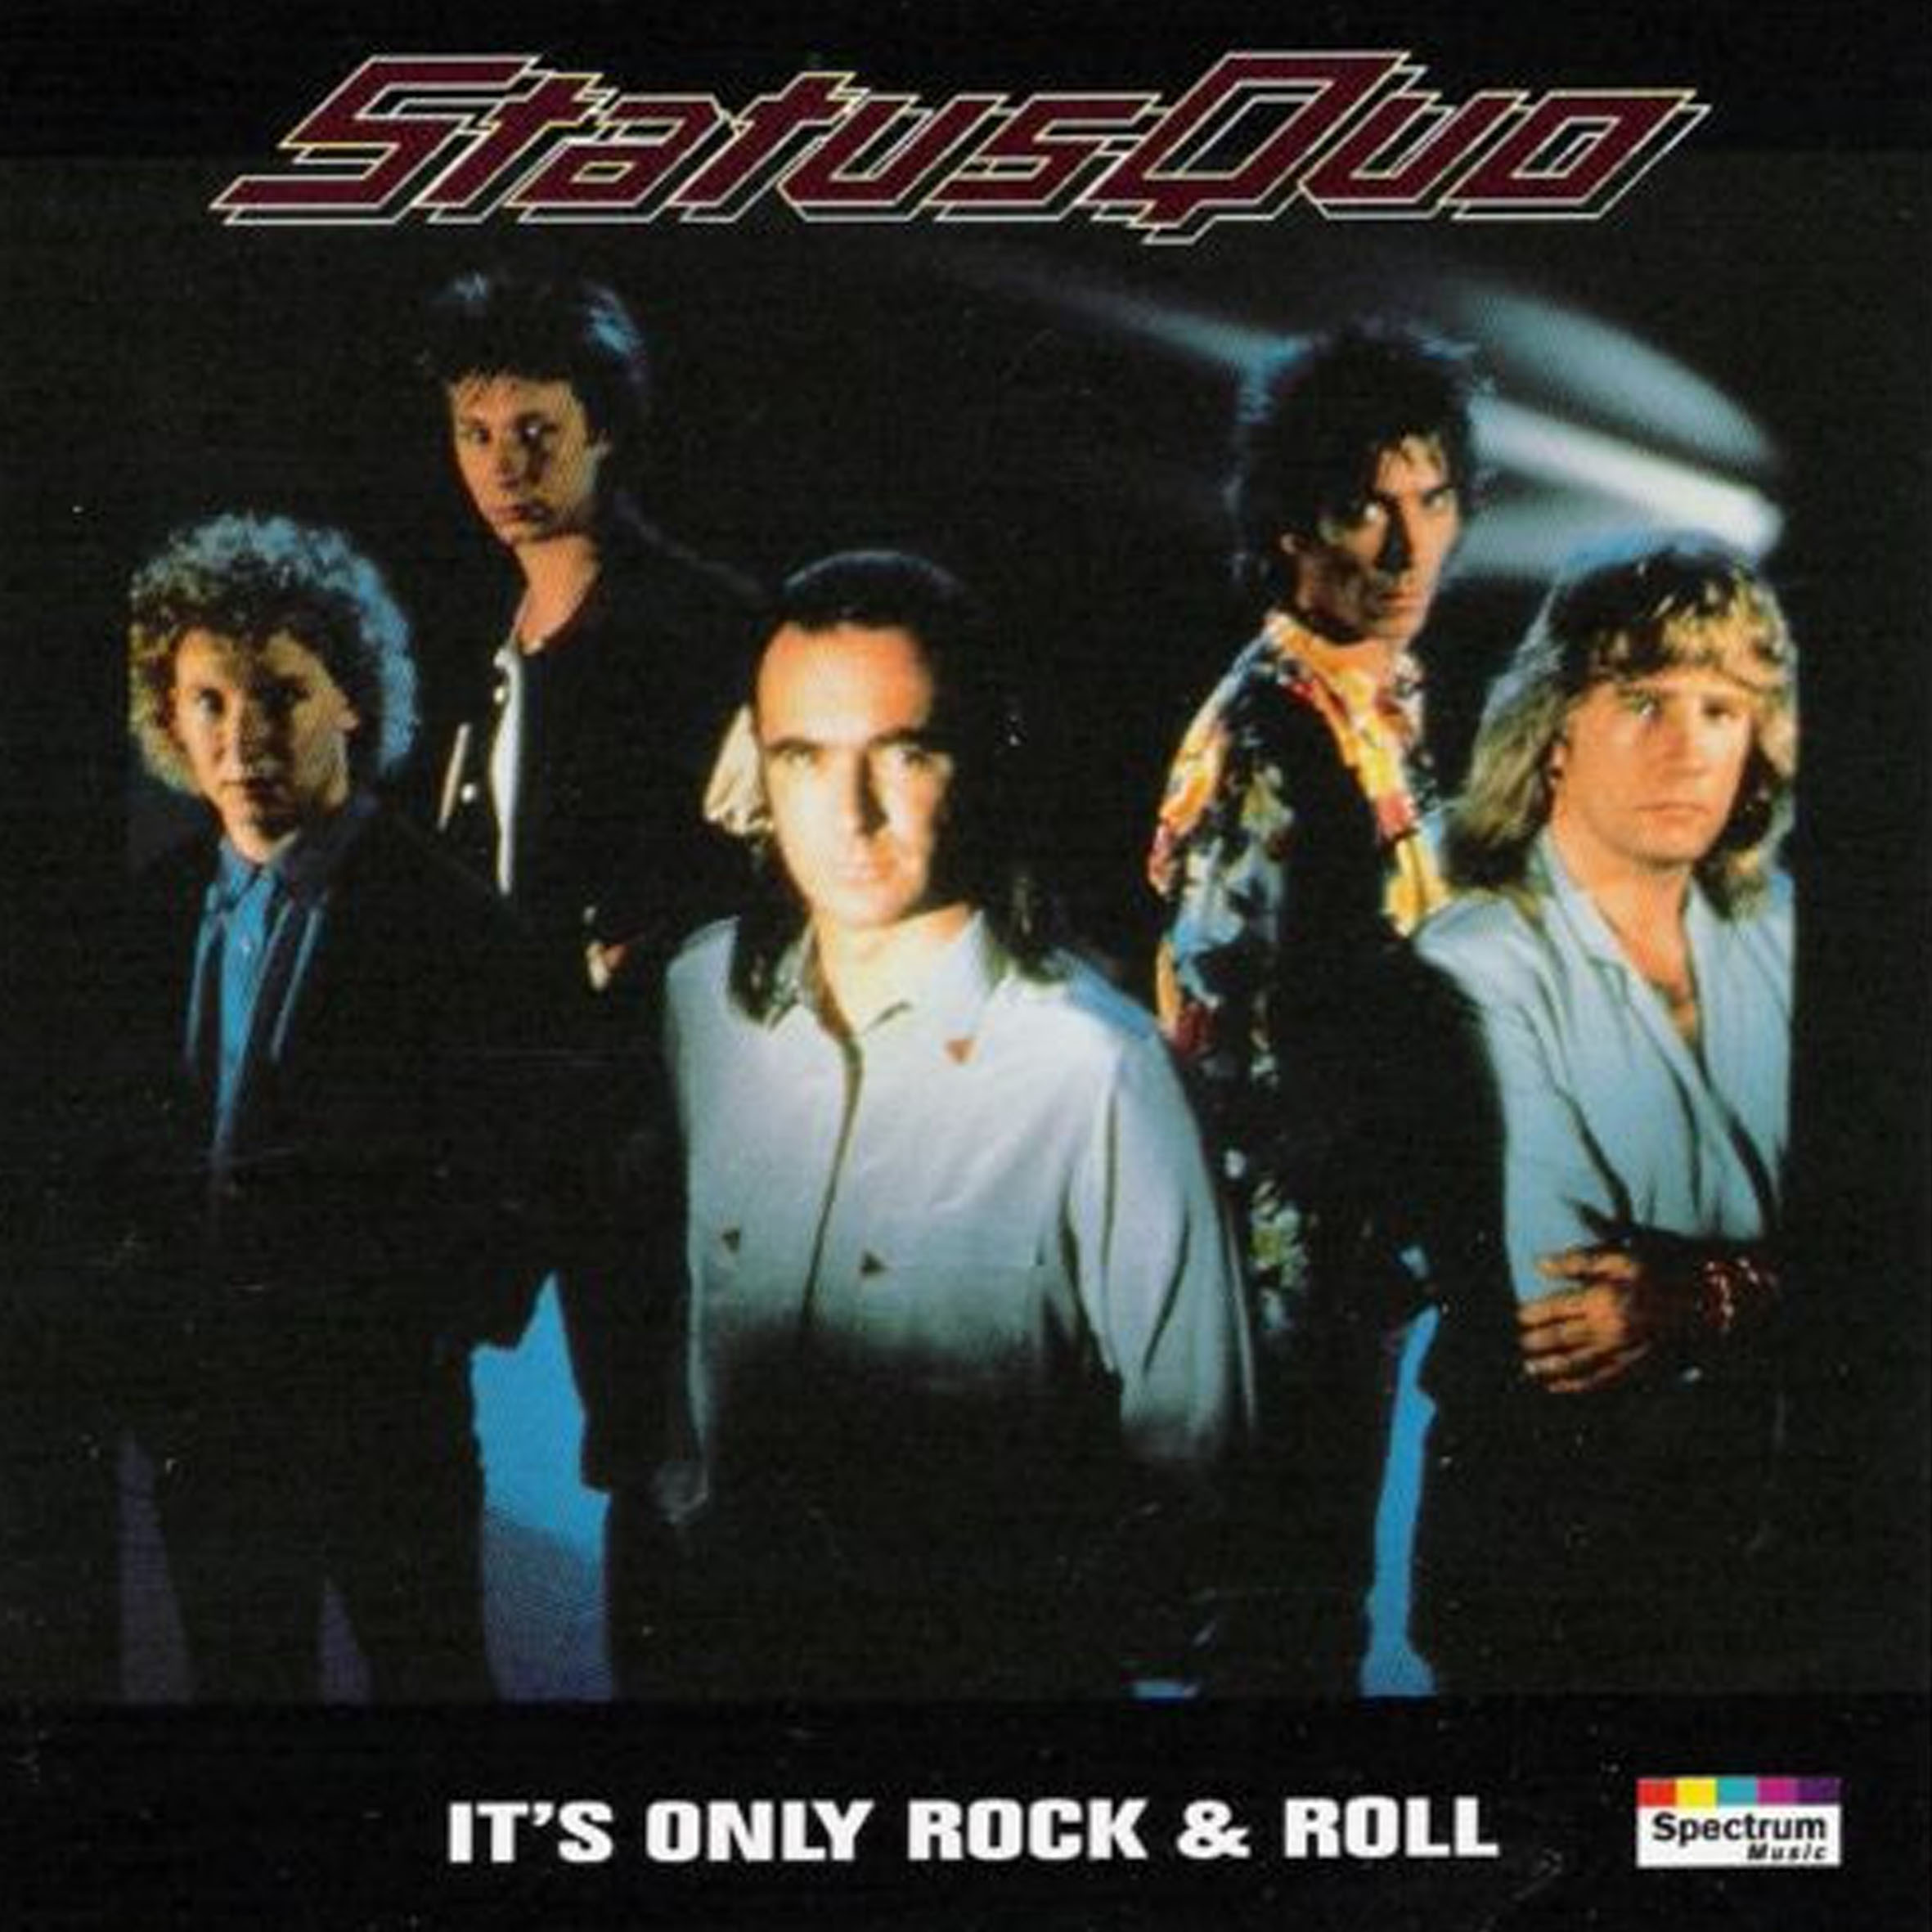 CD - Status Quo - Its Only Rock & Roll (Germany)